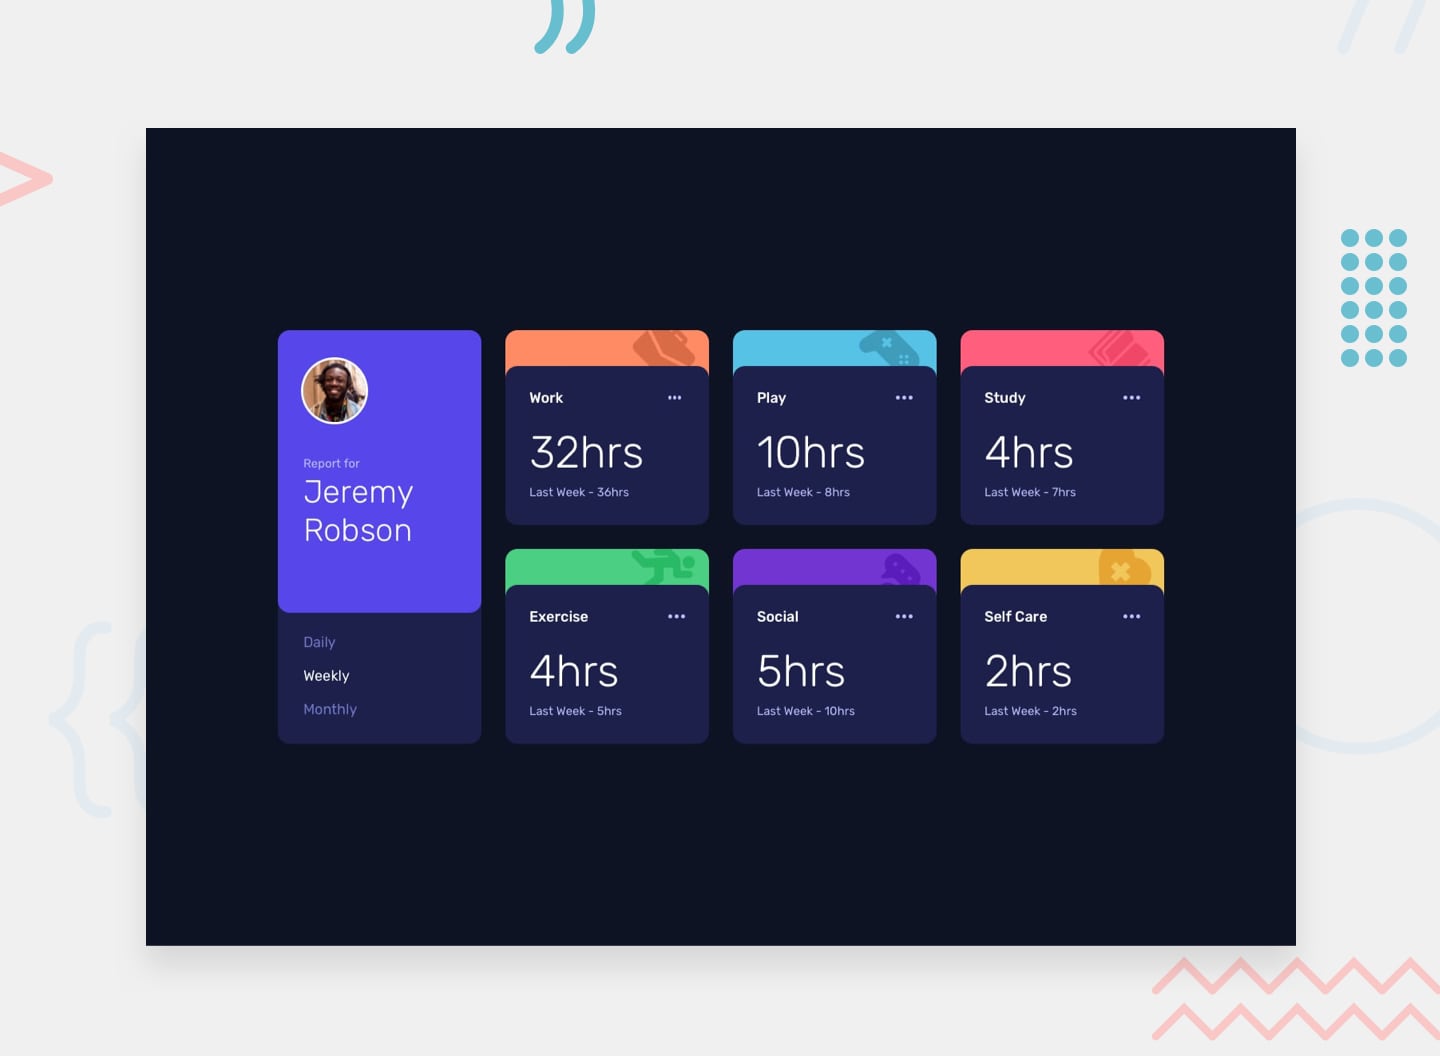 Design preview for the Time tracking dashboard coding challenge